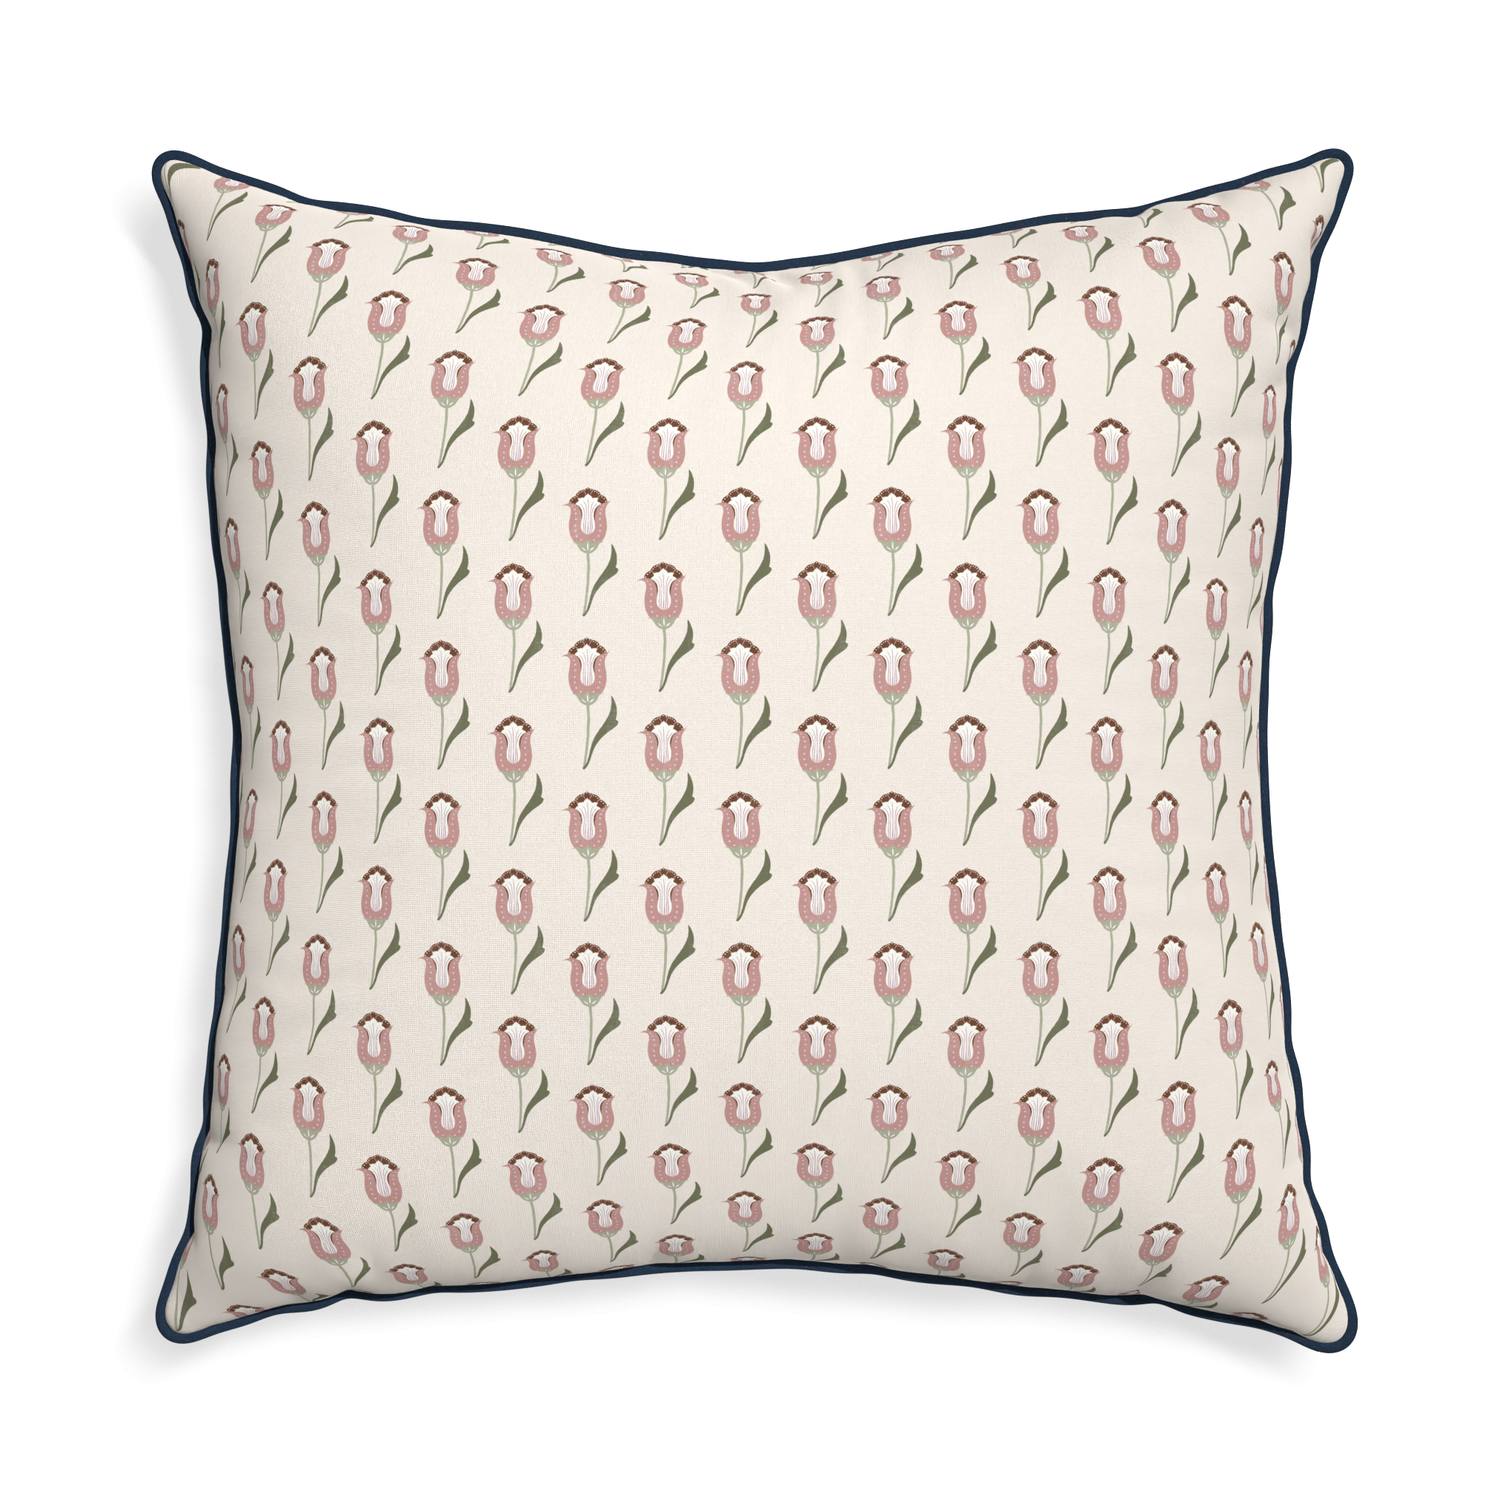 Euro-sham annabelle orchid custom pink tulippillow with c piping on white background